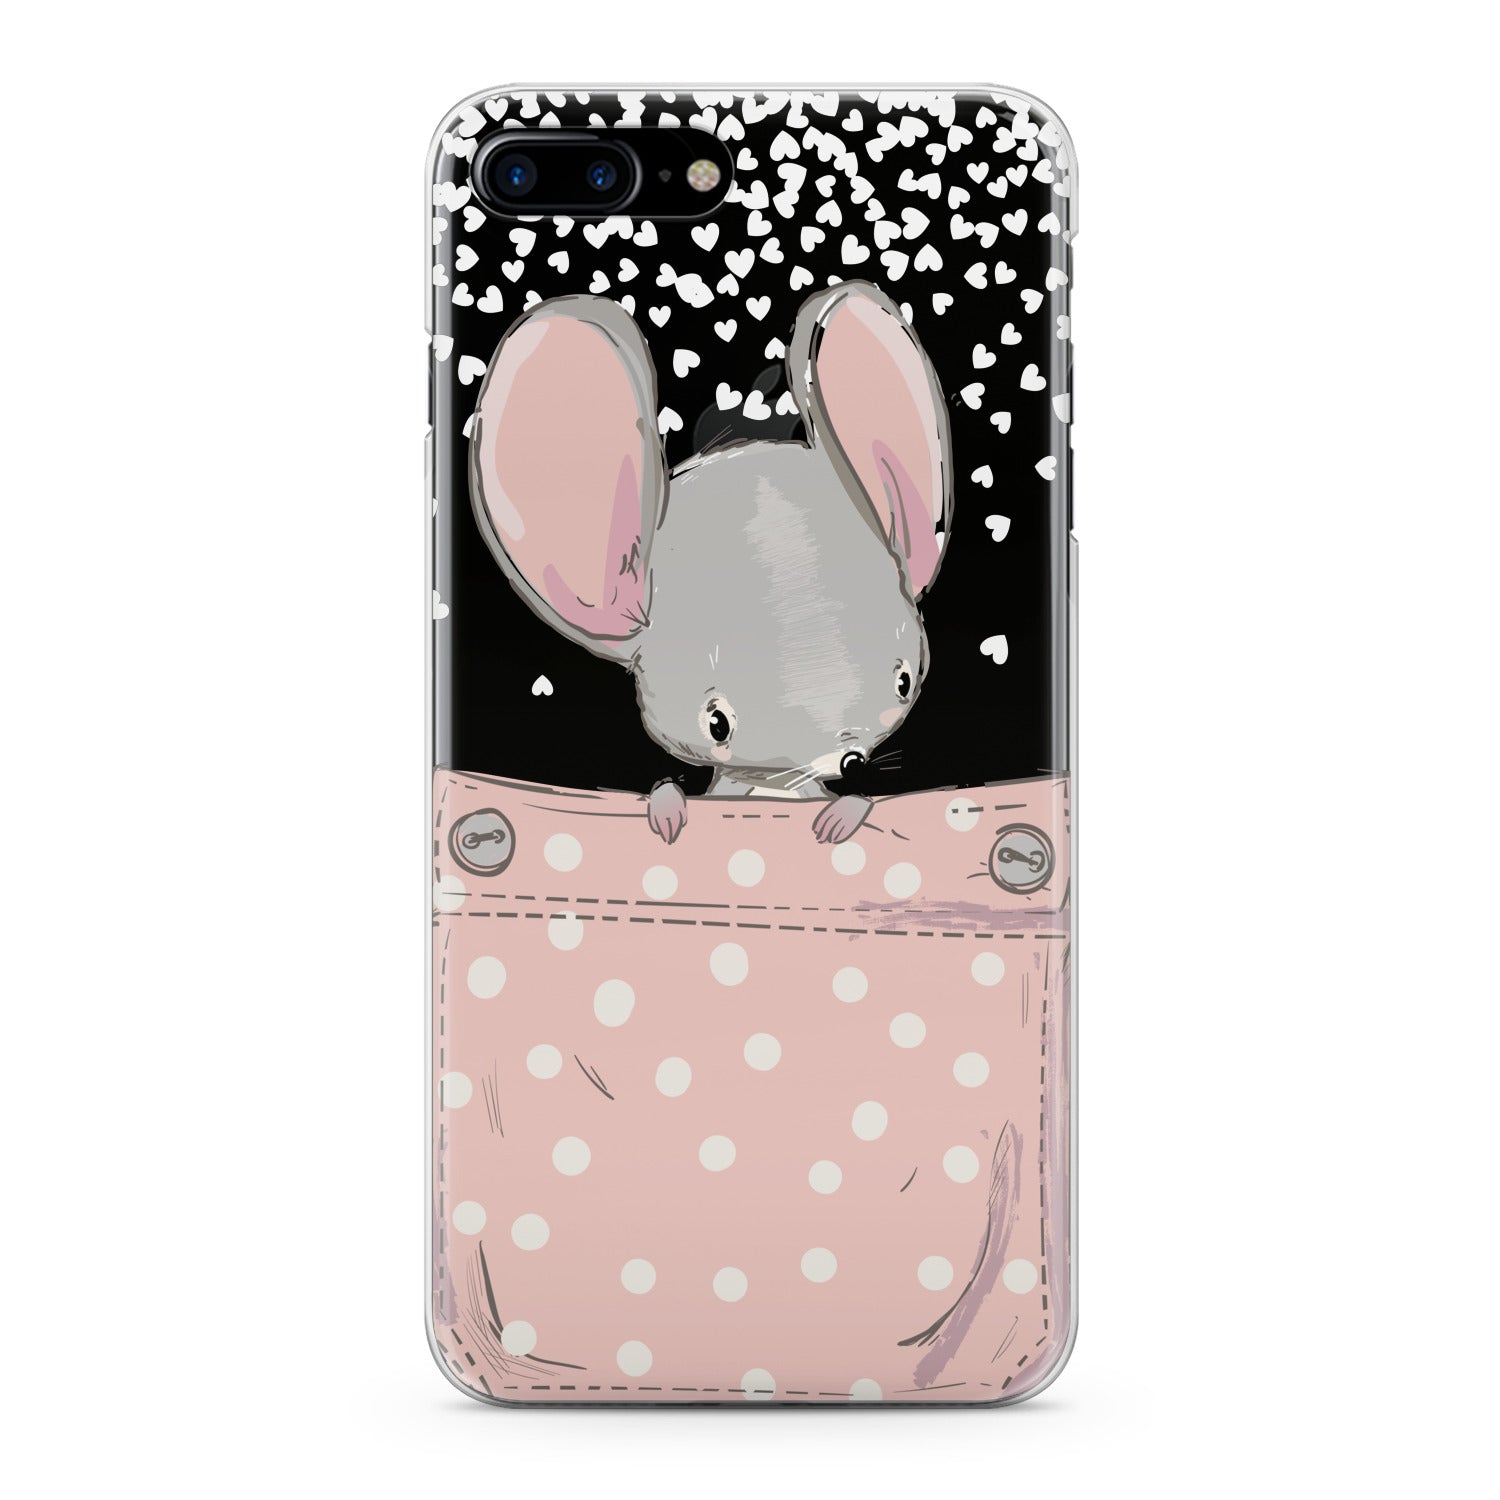 Lex Altern Cute Mouse Phone Case for your iPhone & Android phone.